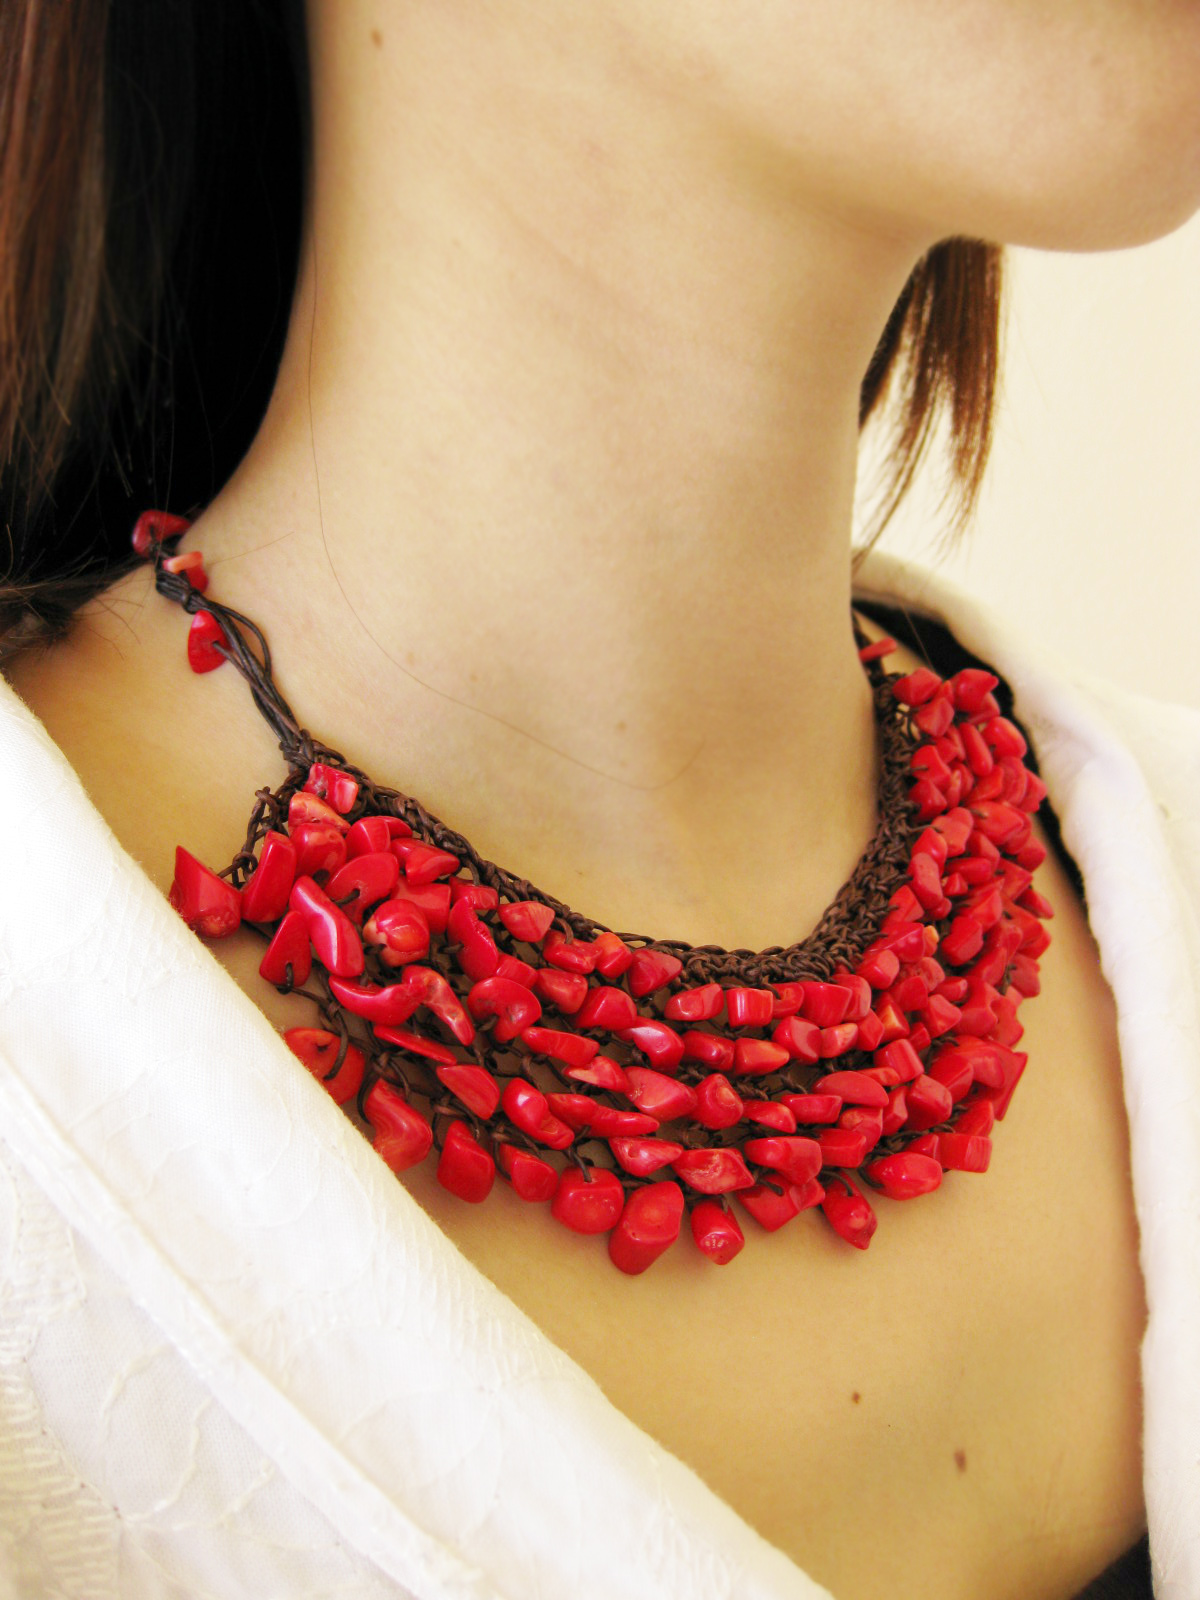 Knitting Necklace Red Coral With Wax Thread, Boho Hippie Style, Thailand Handmade Jewelry. (jn1005-re)